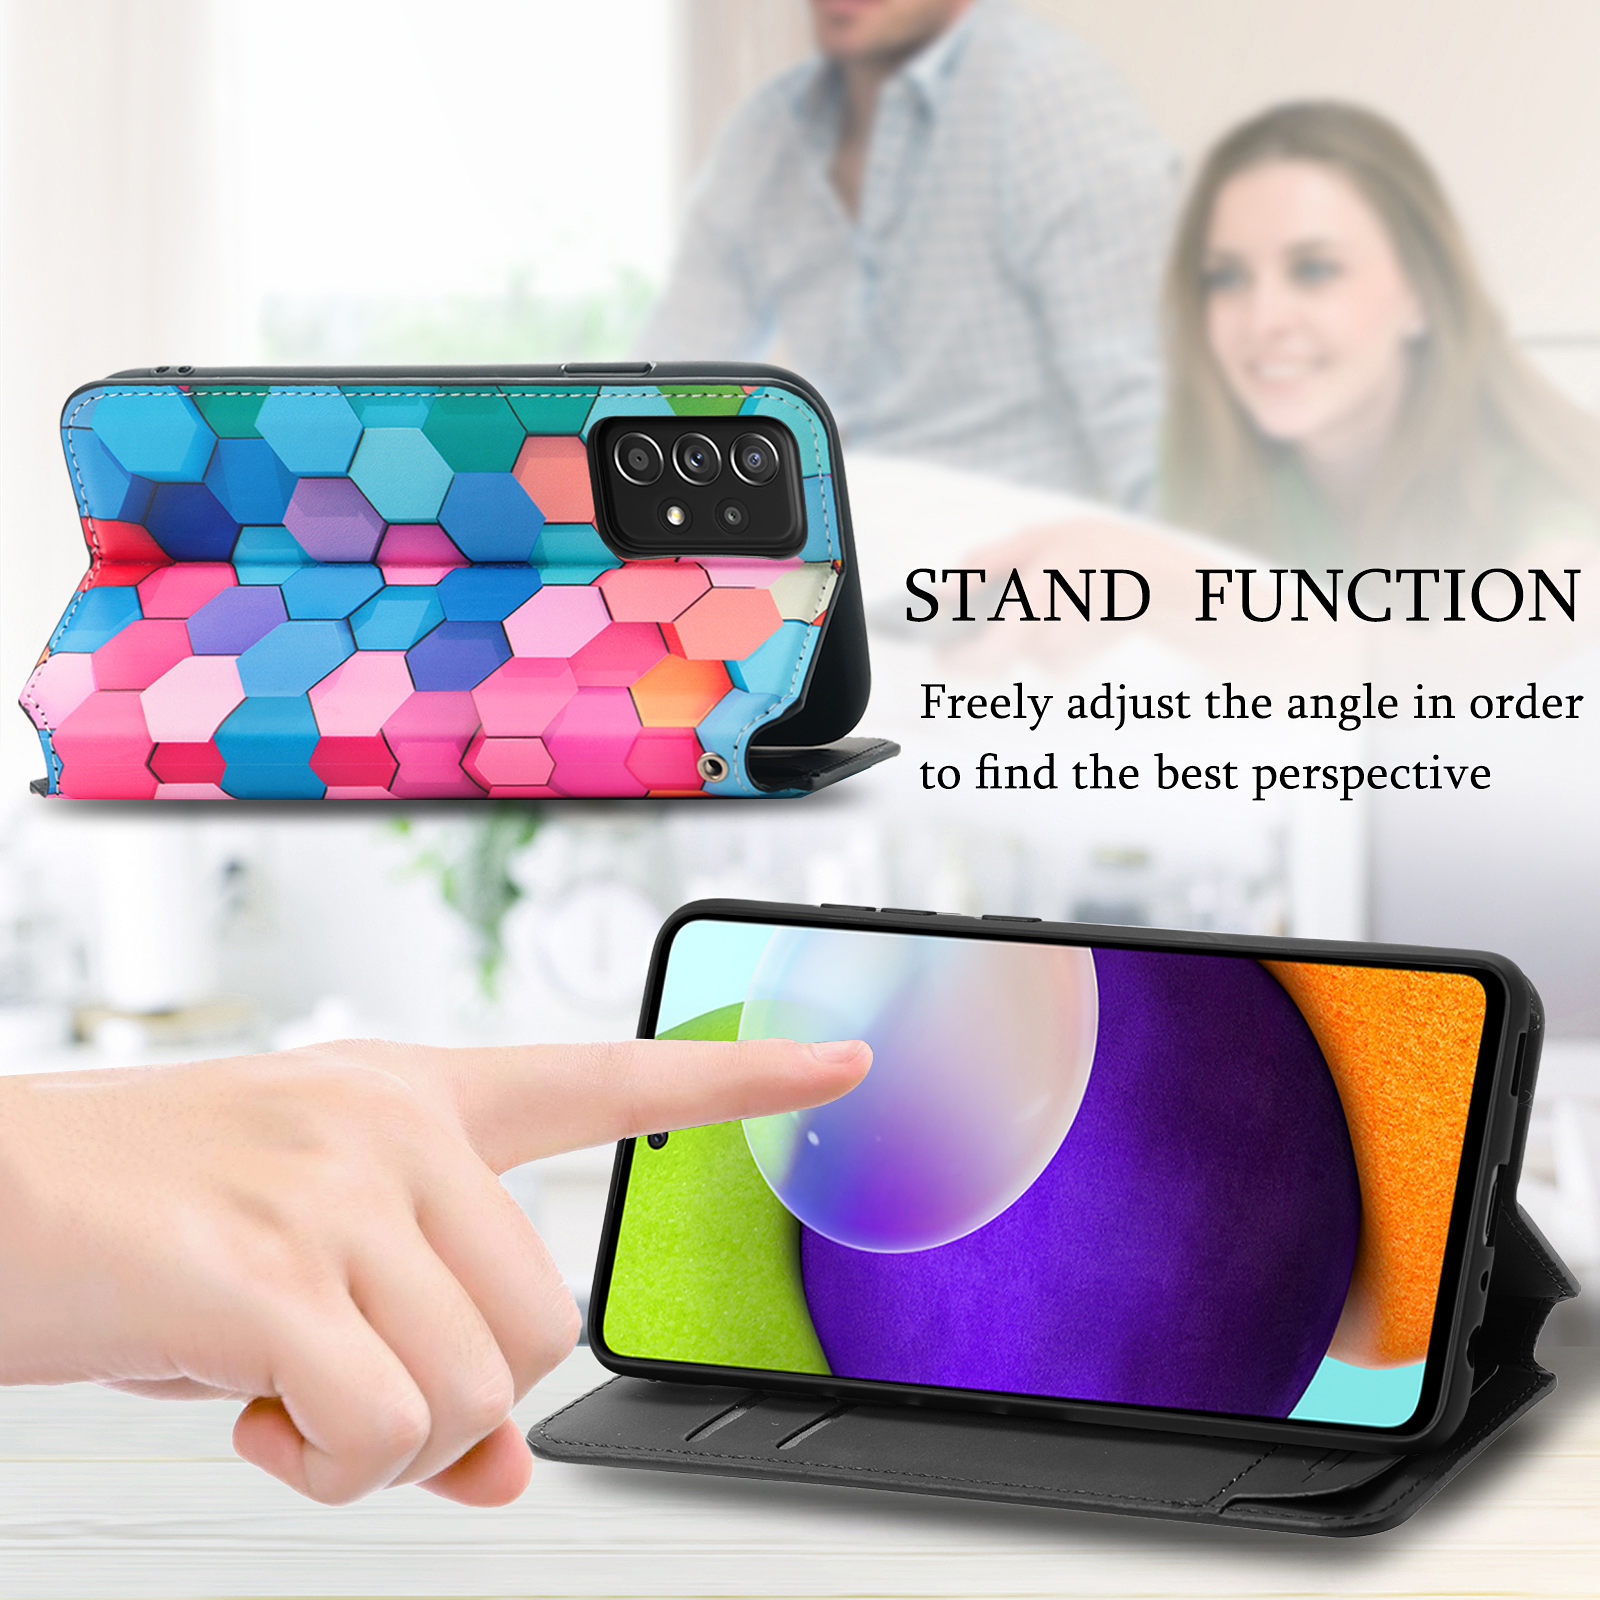 Case for Samsung Galaxy S21 Case, Galaxy S21 Case Wallet Case PU Leather and Hard PC RFID Blocking Slim Durable Protective Phone Case Cover For Samsung Galaxy S21,Rainbow Cube - image 5 of 9